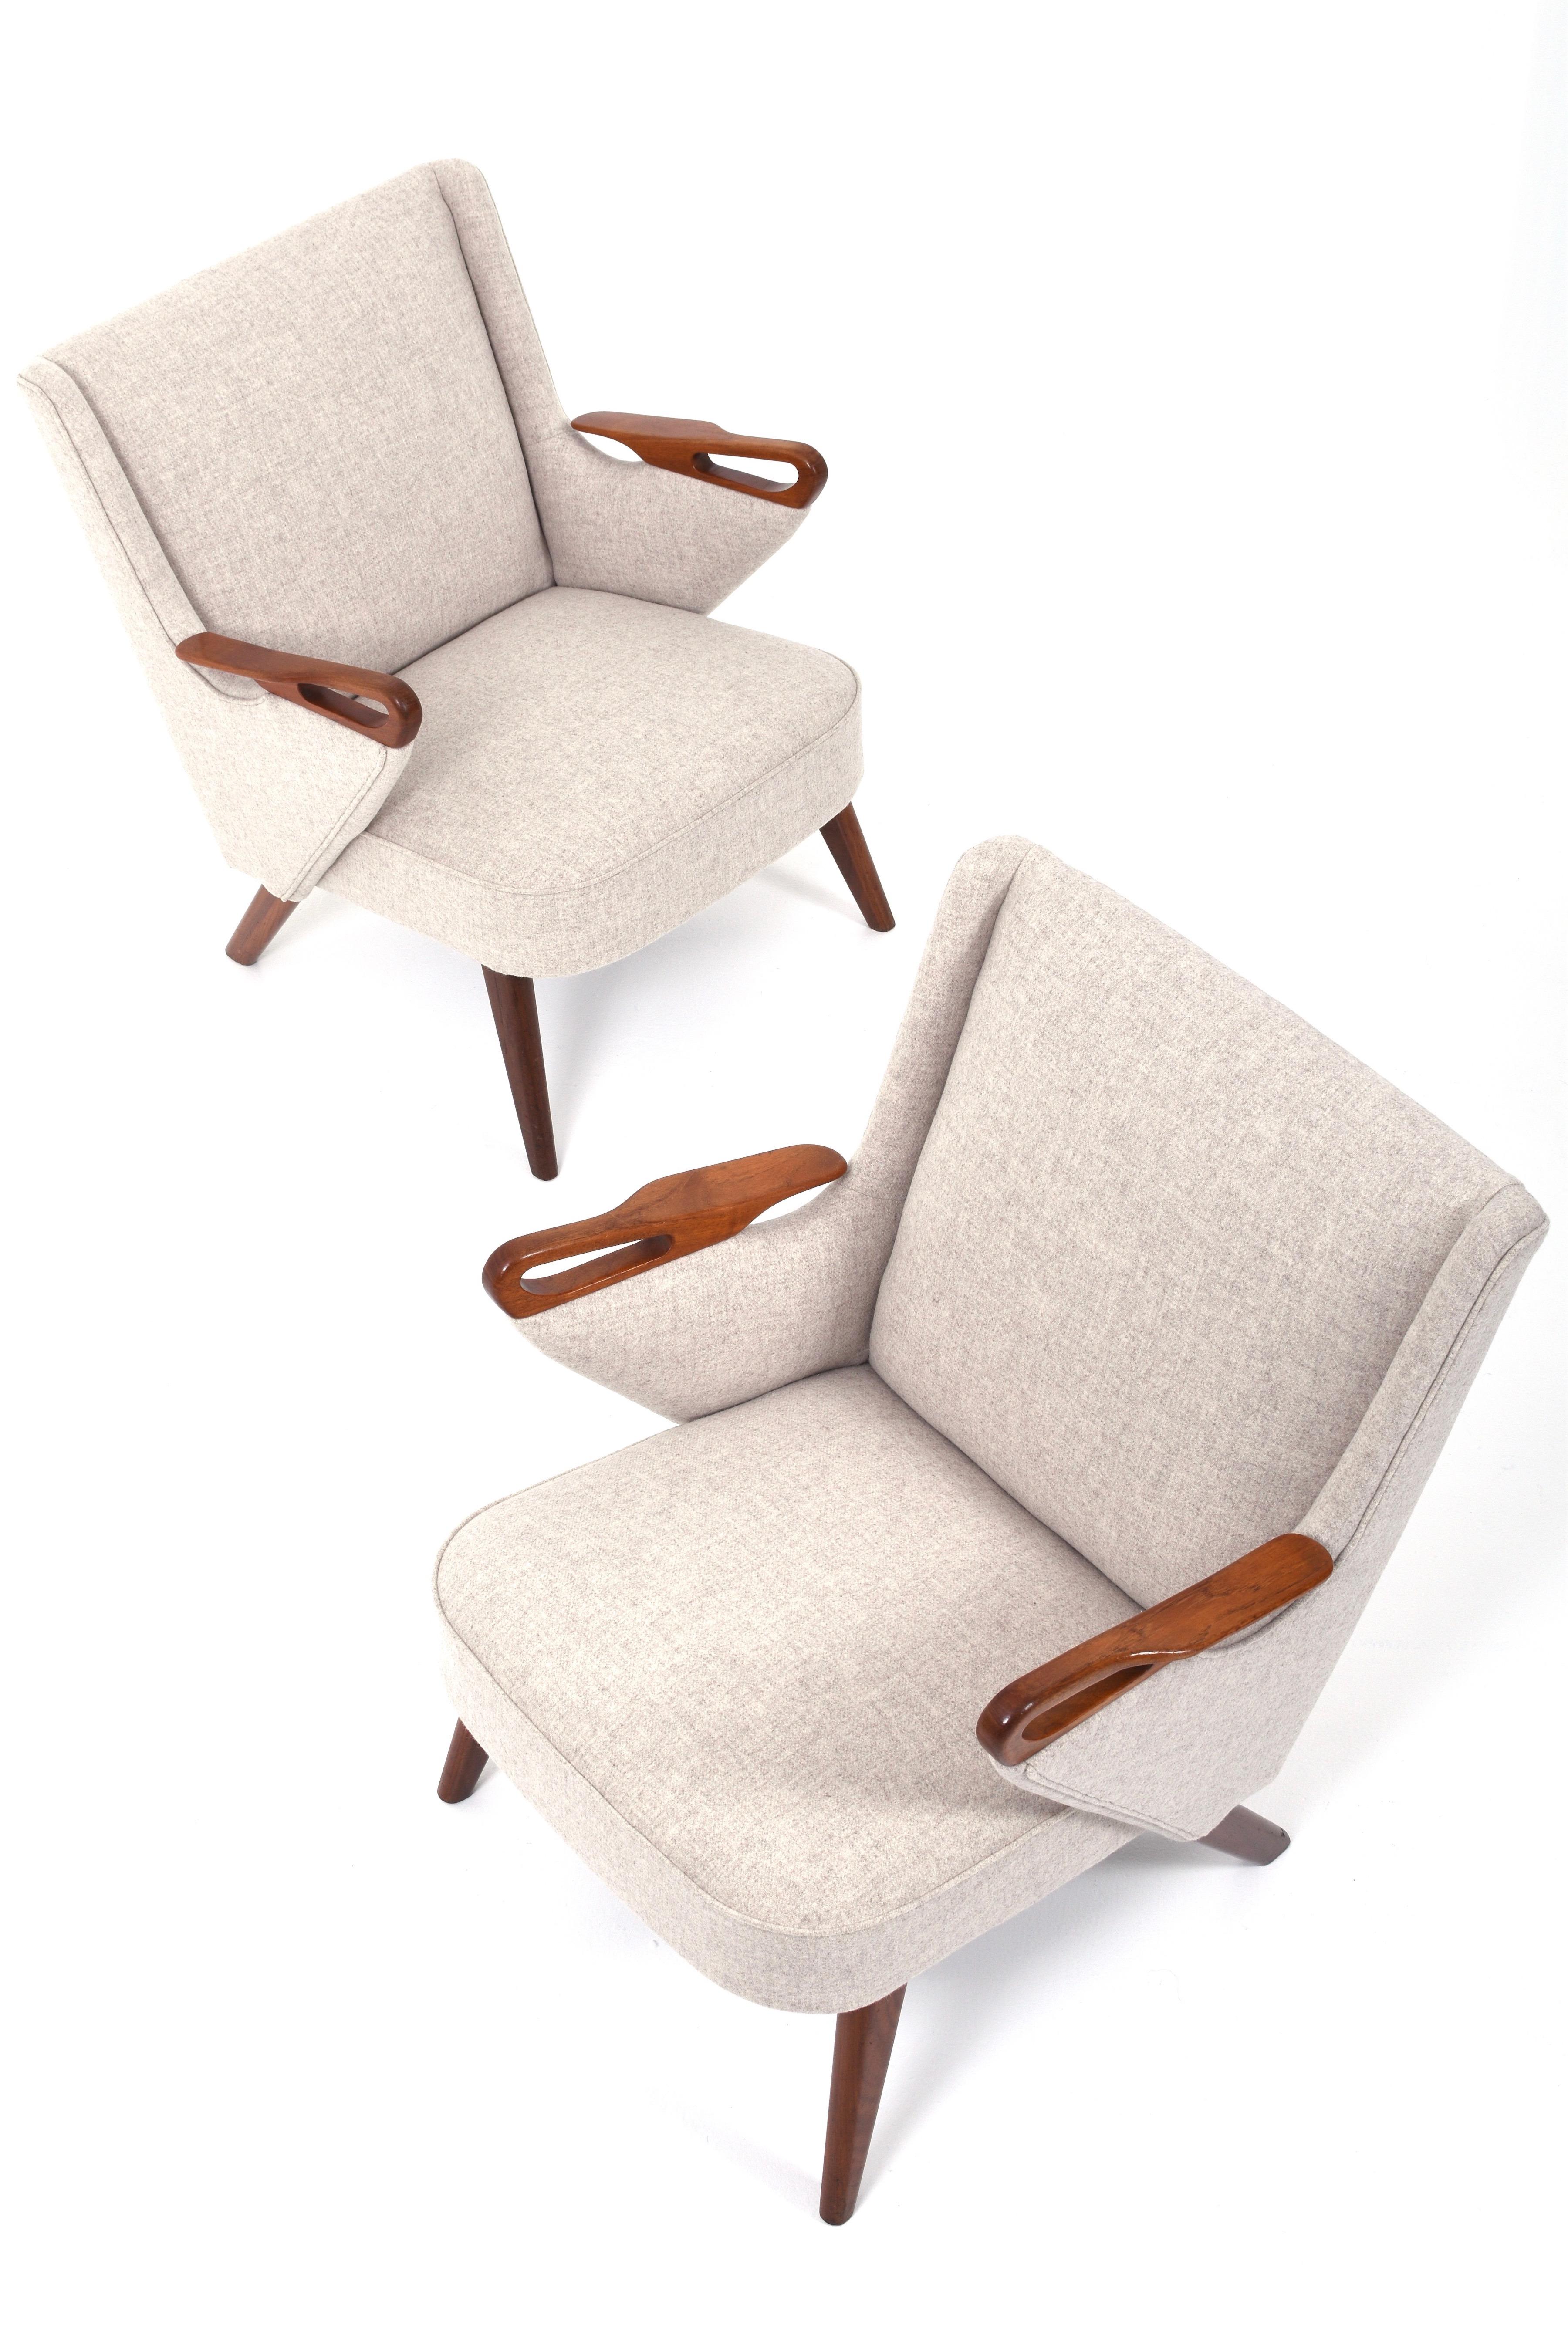 findahls mobler chairs